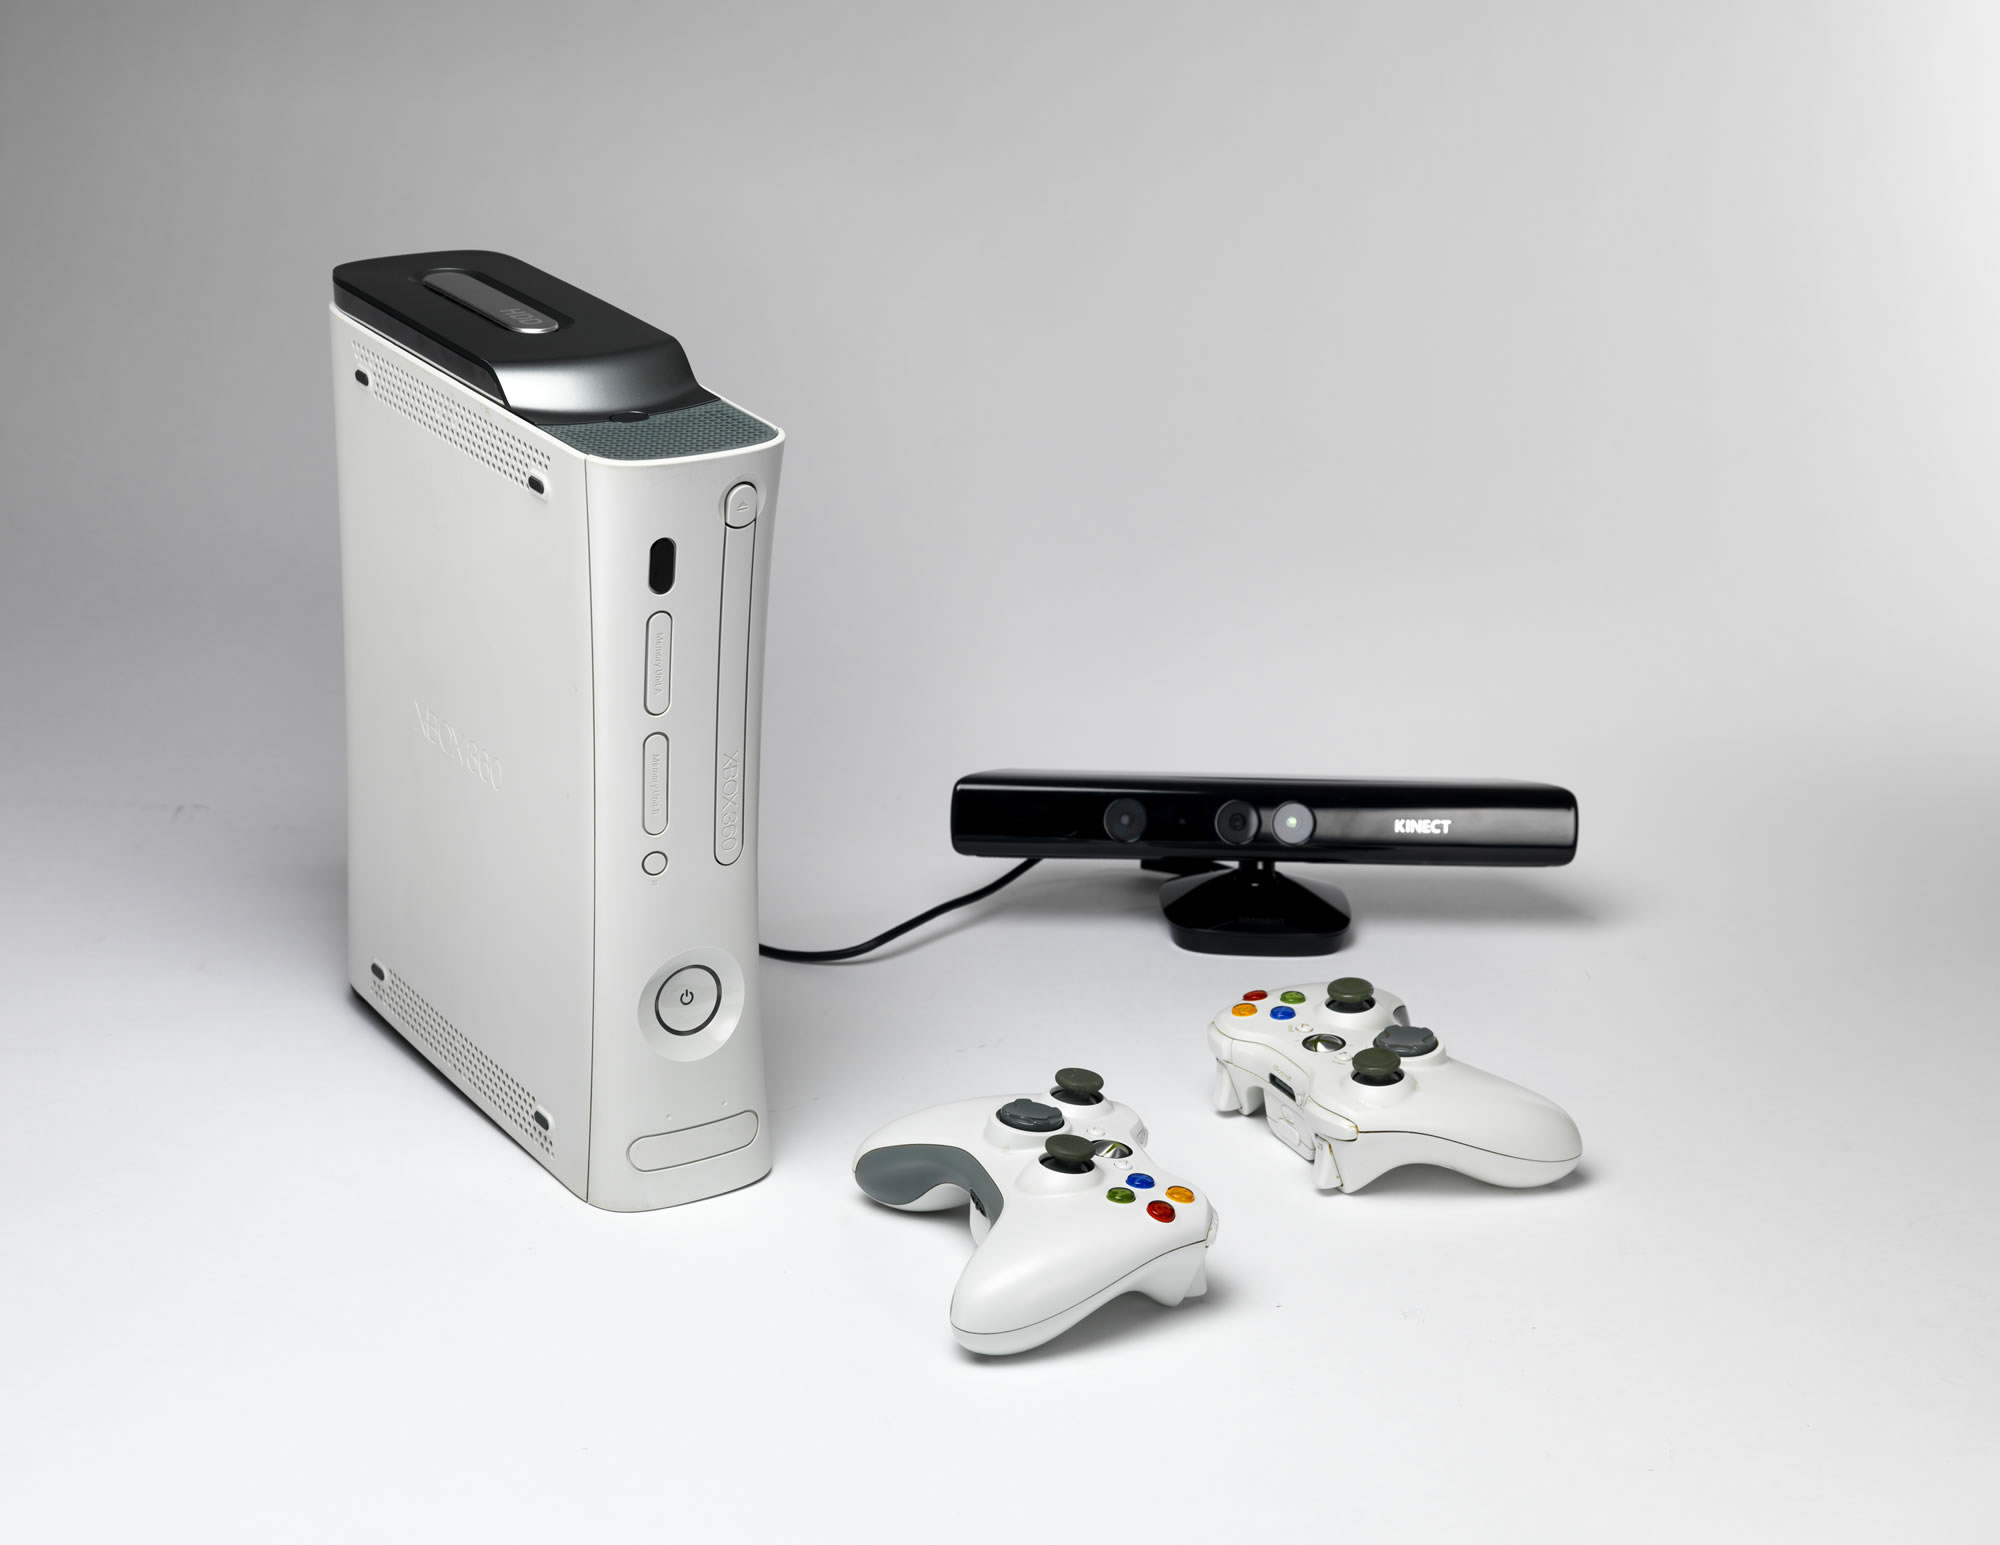 The user experience: hardware (Xbox Kinect 360) and software (Ubisoft's